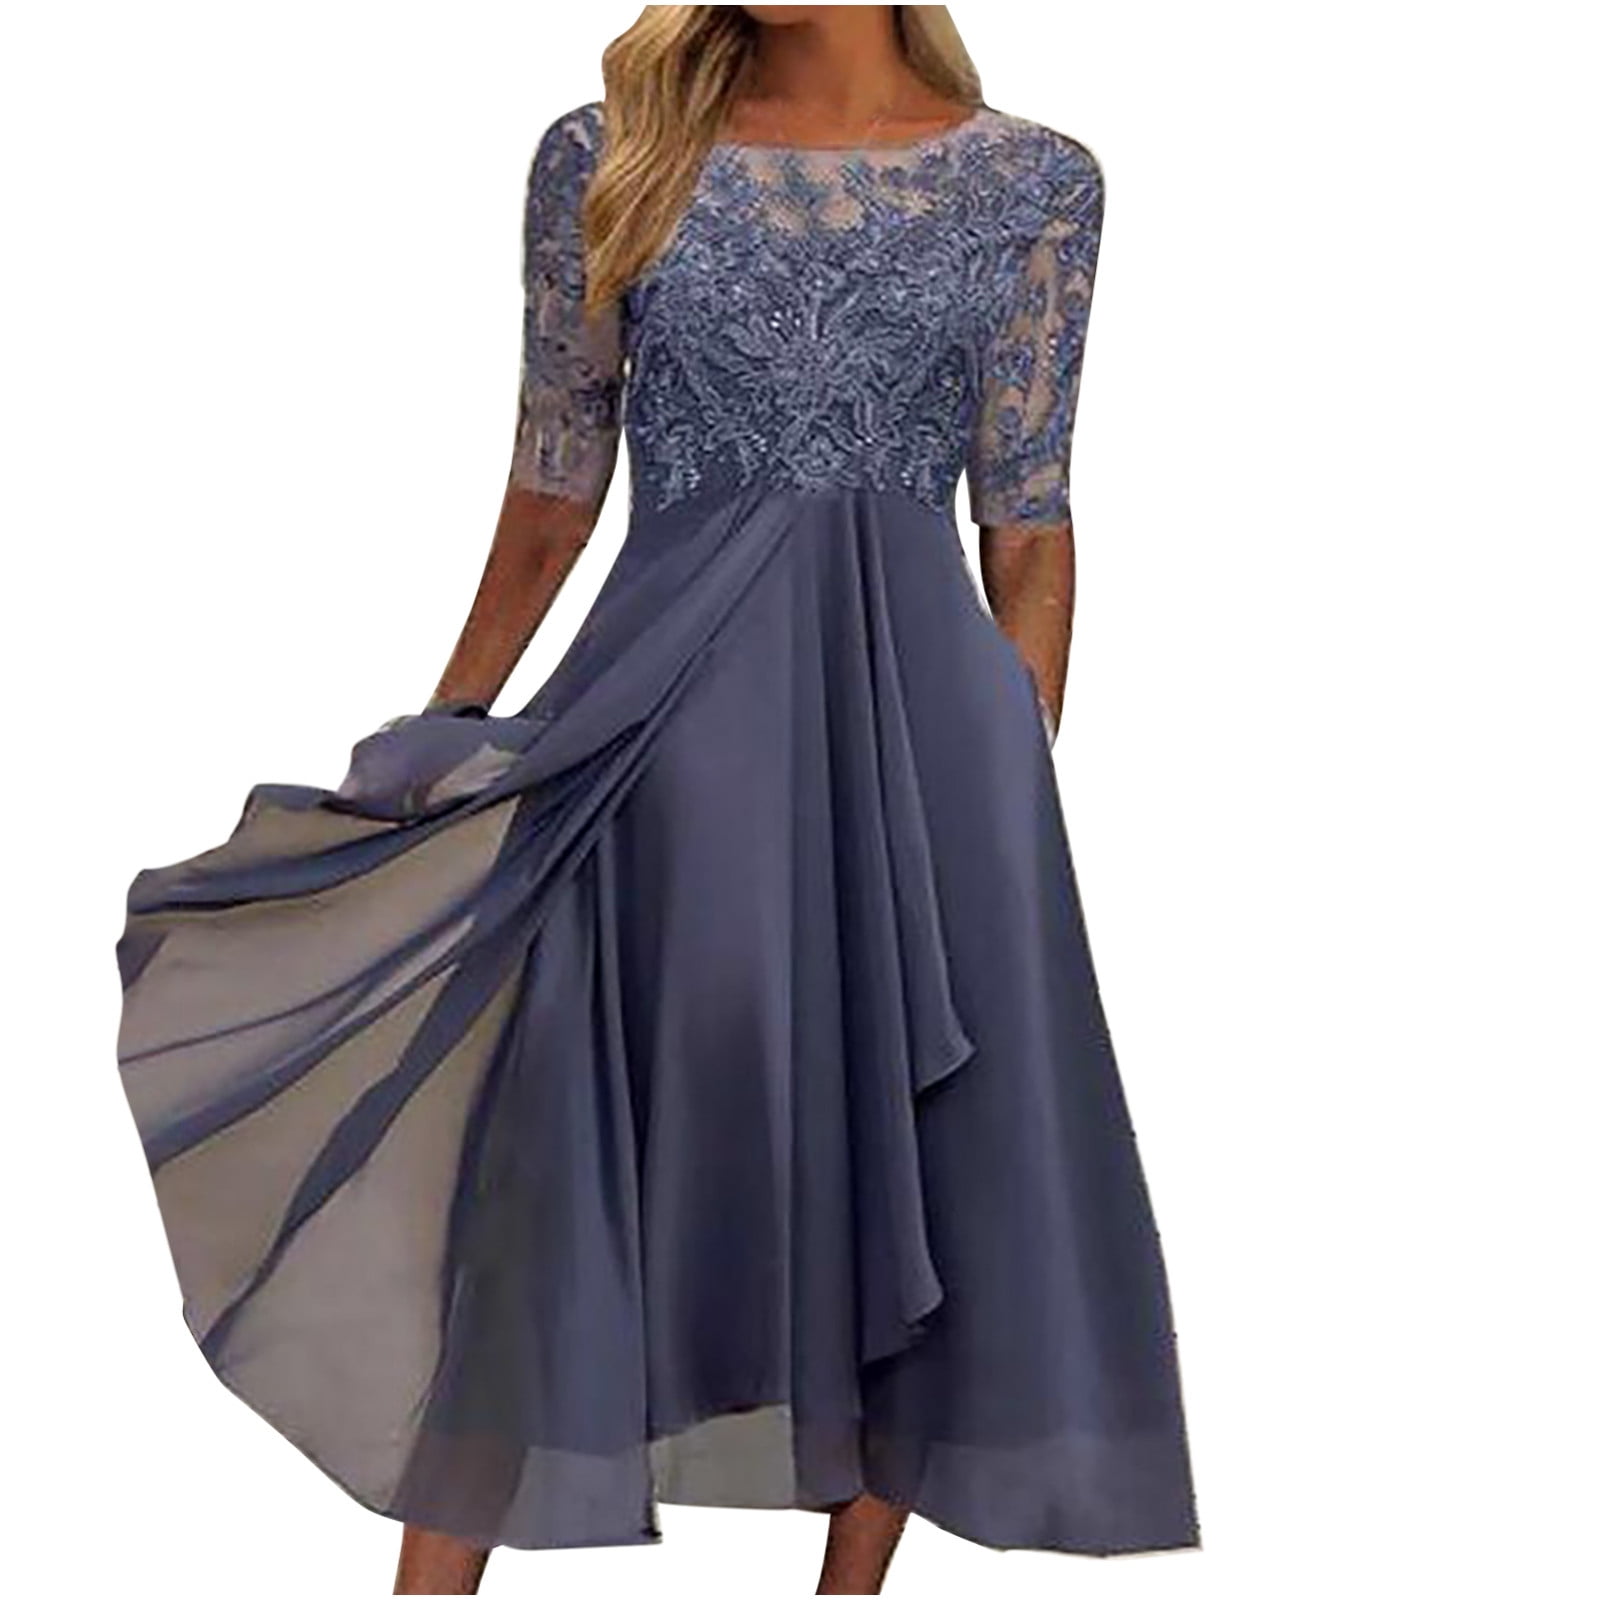 ZQGJB Lace Wedding Guest Dresses for Women Half Sleeve Mother of The ...